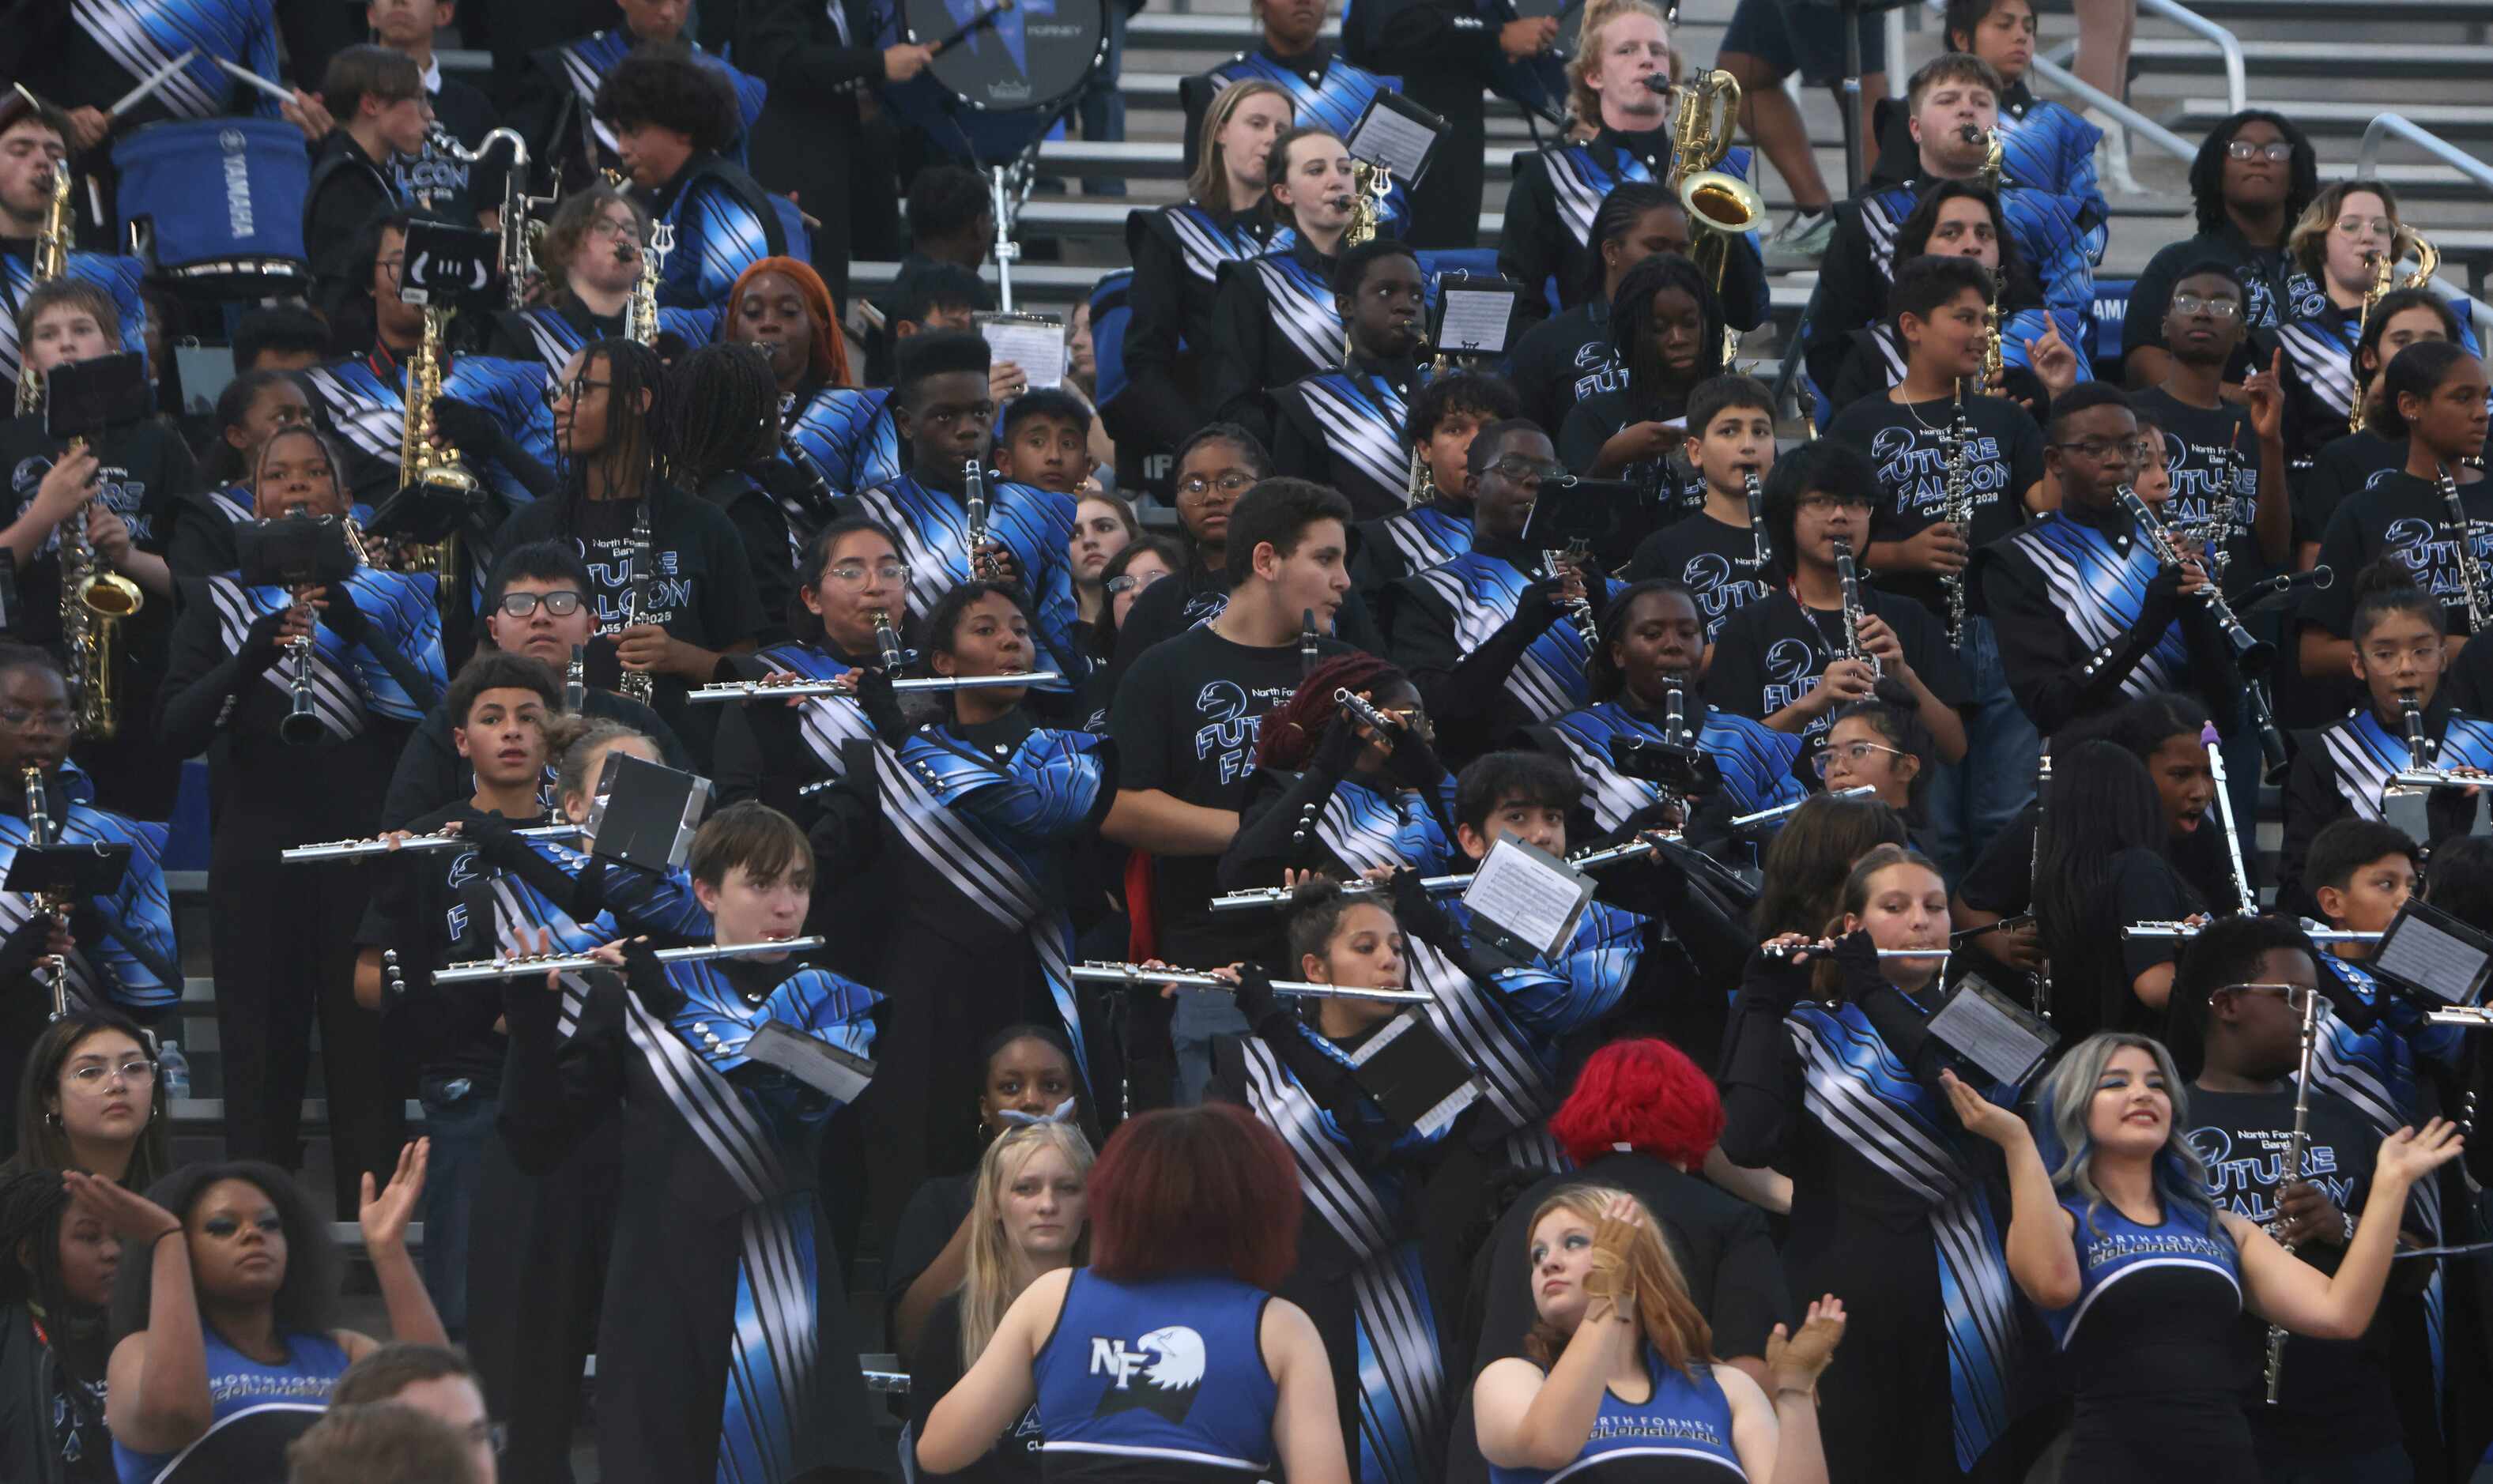 Members of the North Forney band perform in the stands during first quarter action of the...